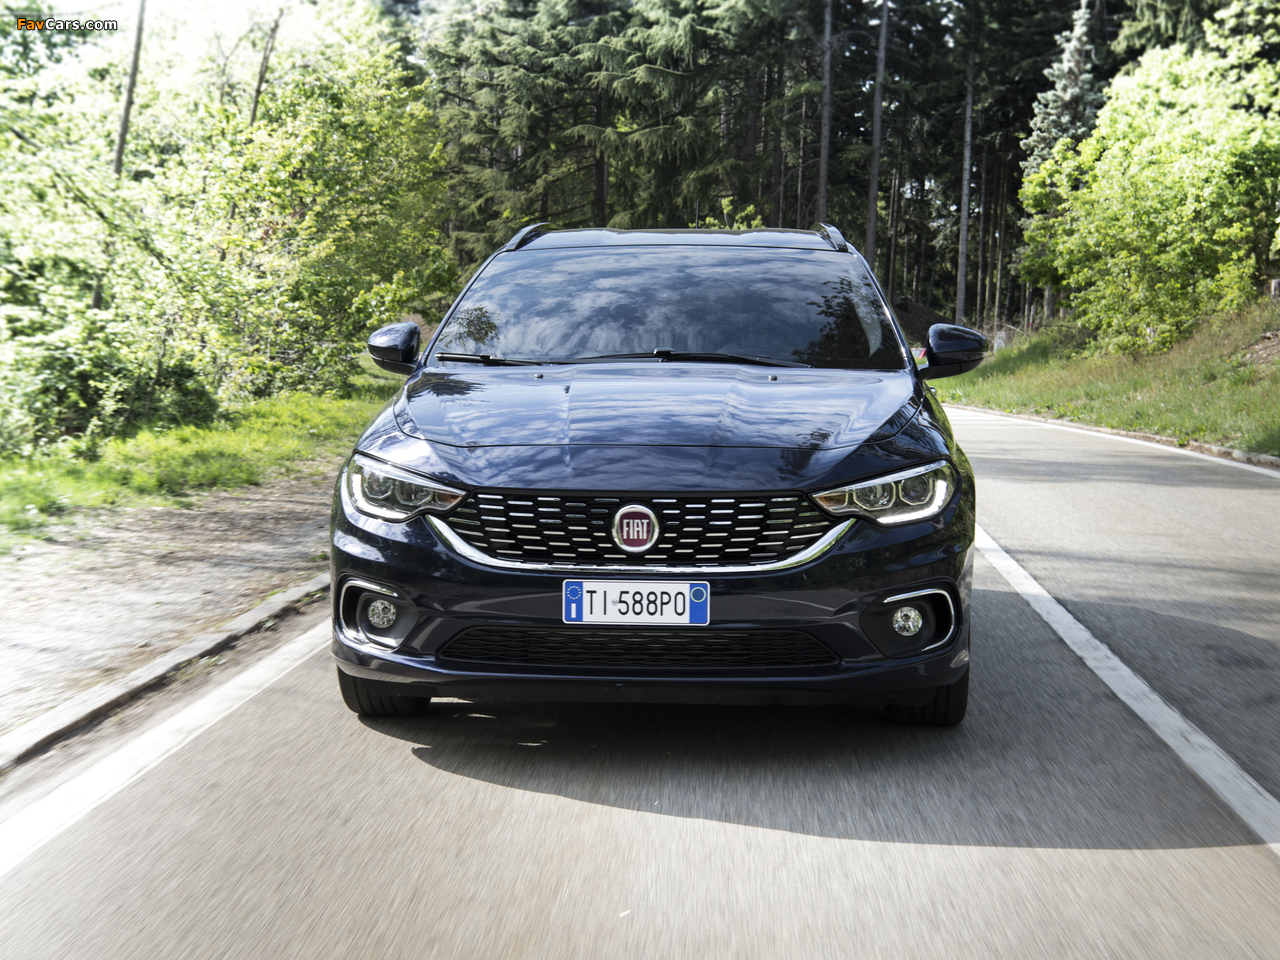 Fiat Tipo Station Wagon (357) 2016 pictures (1280 x 960)